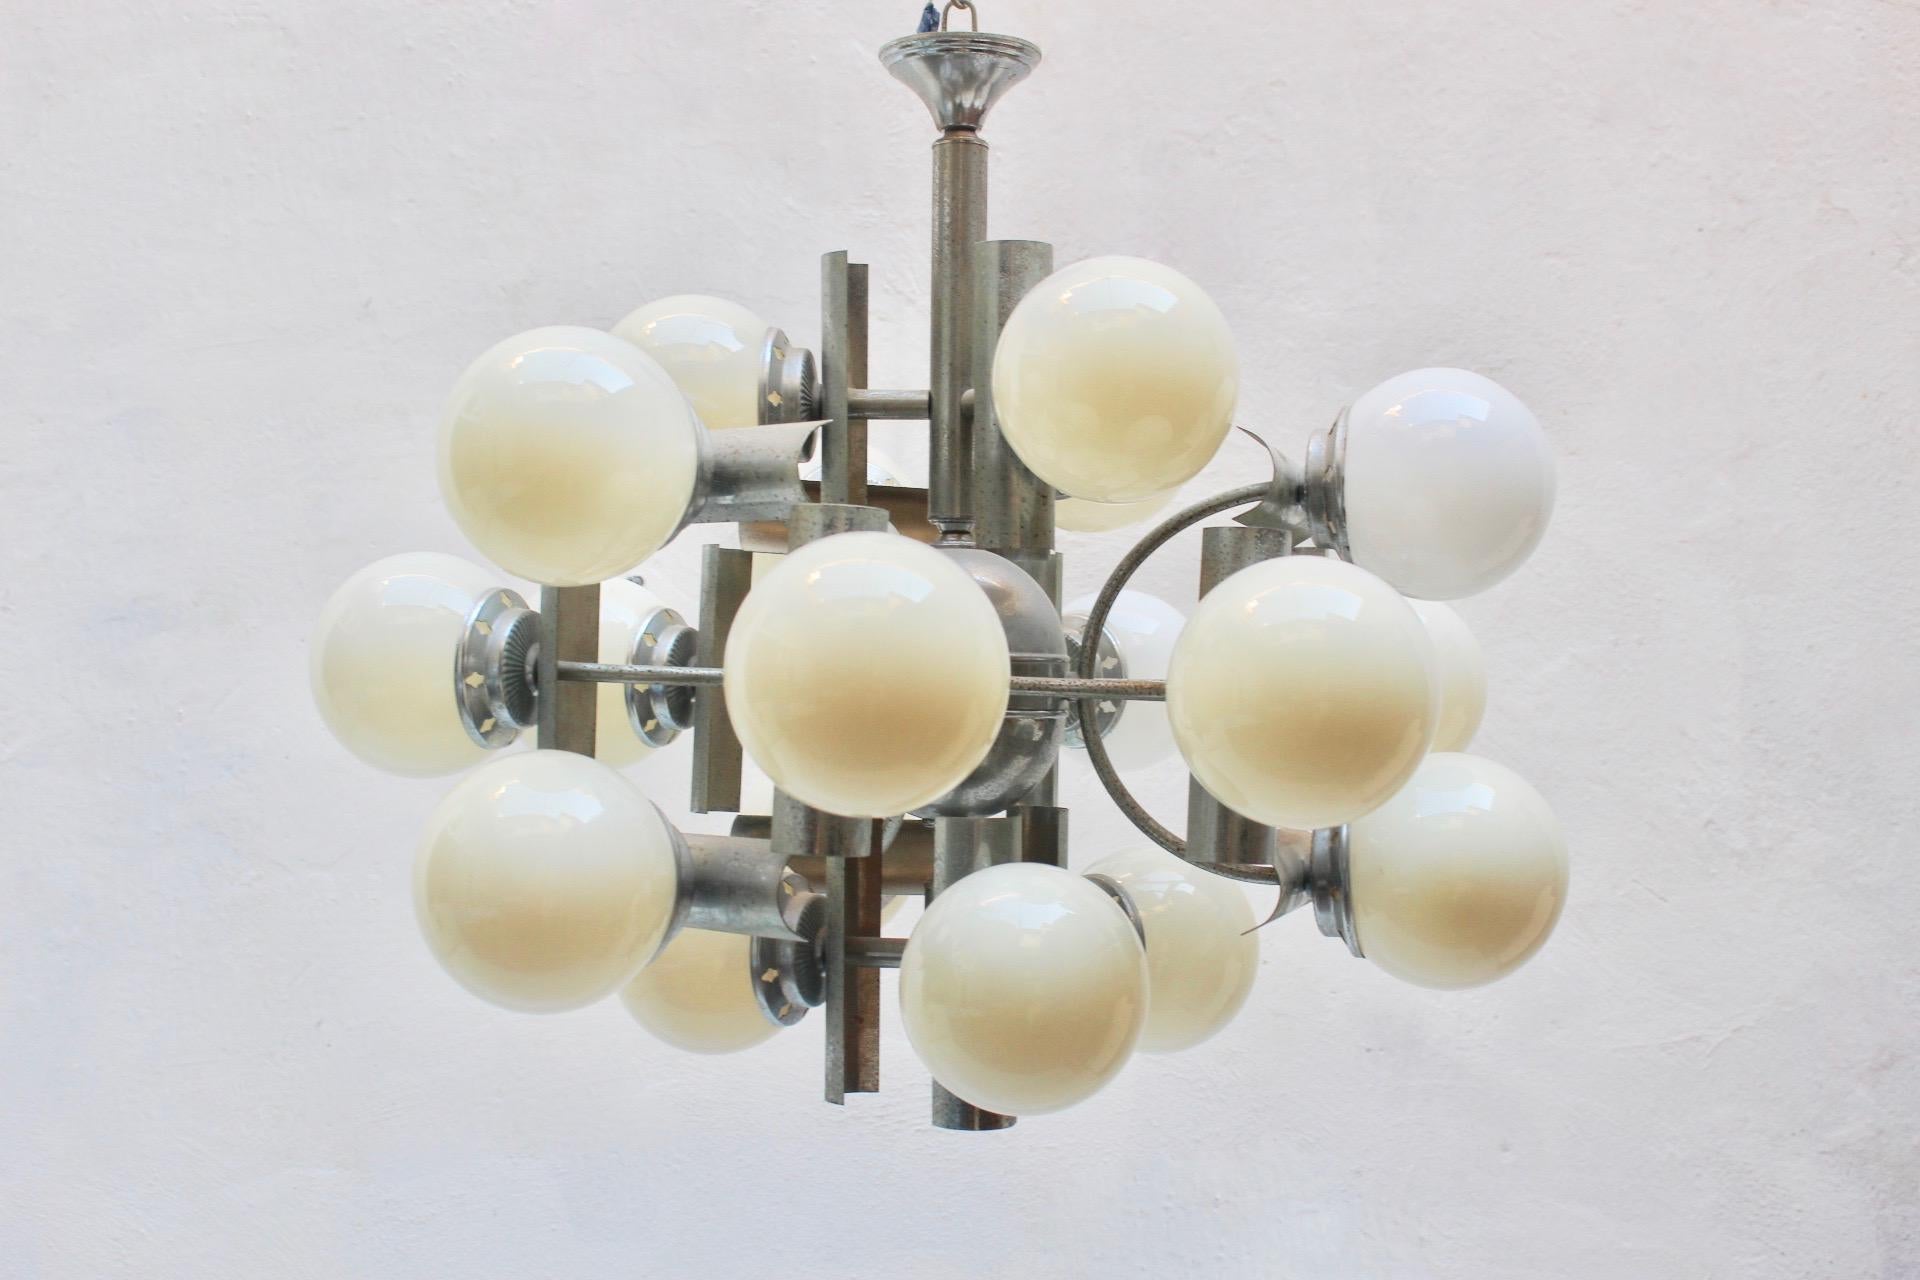 Midcentury Space Age 18 lights Chandelier. Spain, 1960s.
Most of te glass globes are original from age and they have a kind of brown/yellow patina/wear which gives this yellow/amber ambient, but 2 are new and they have a different white